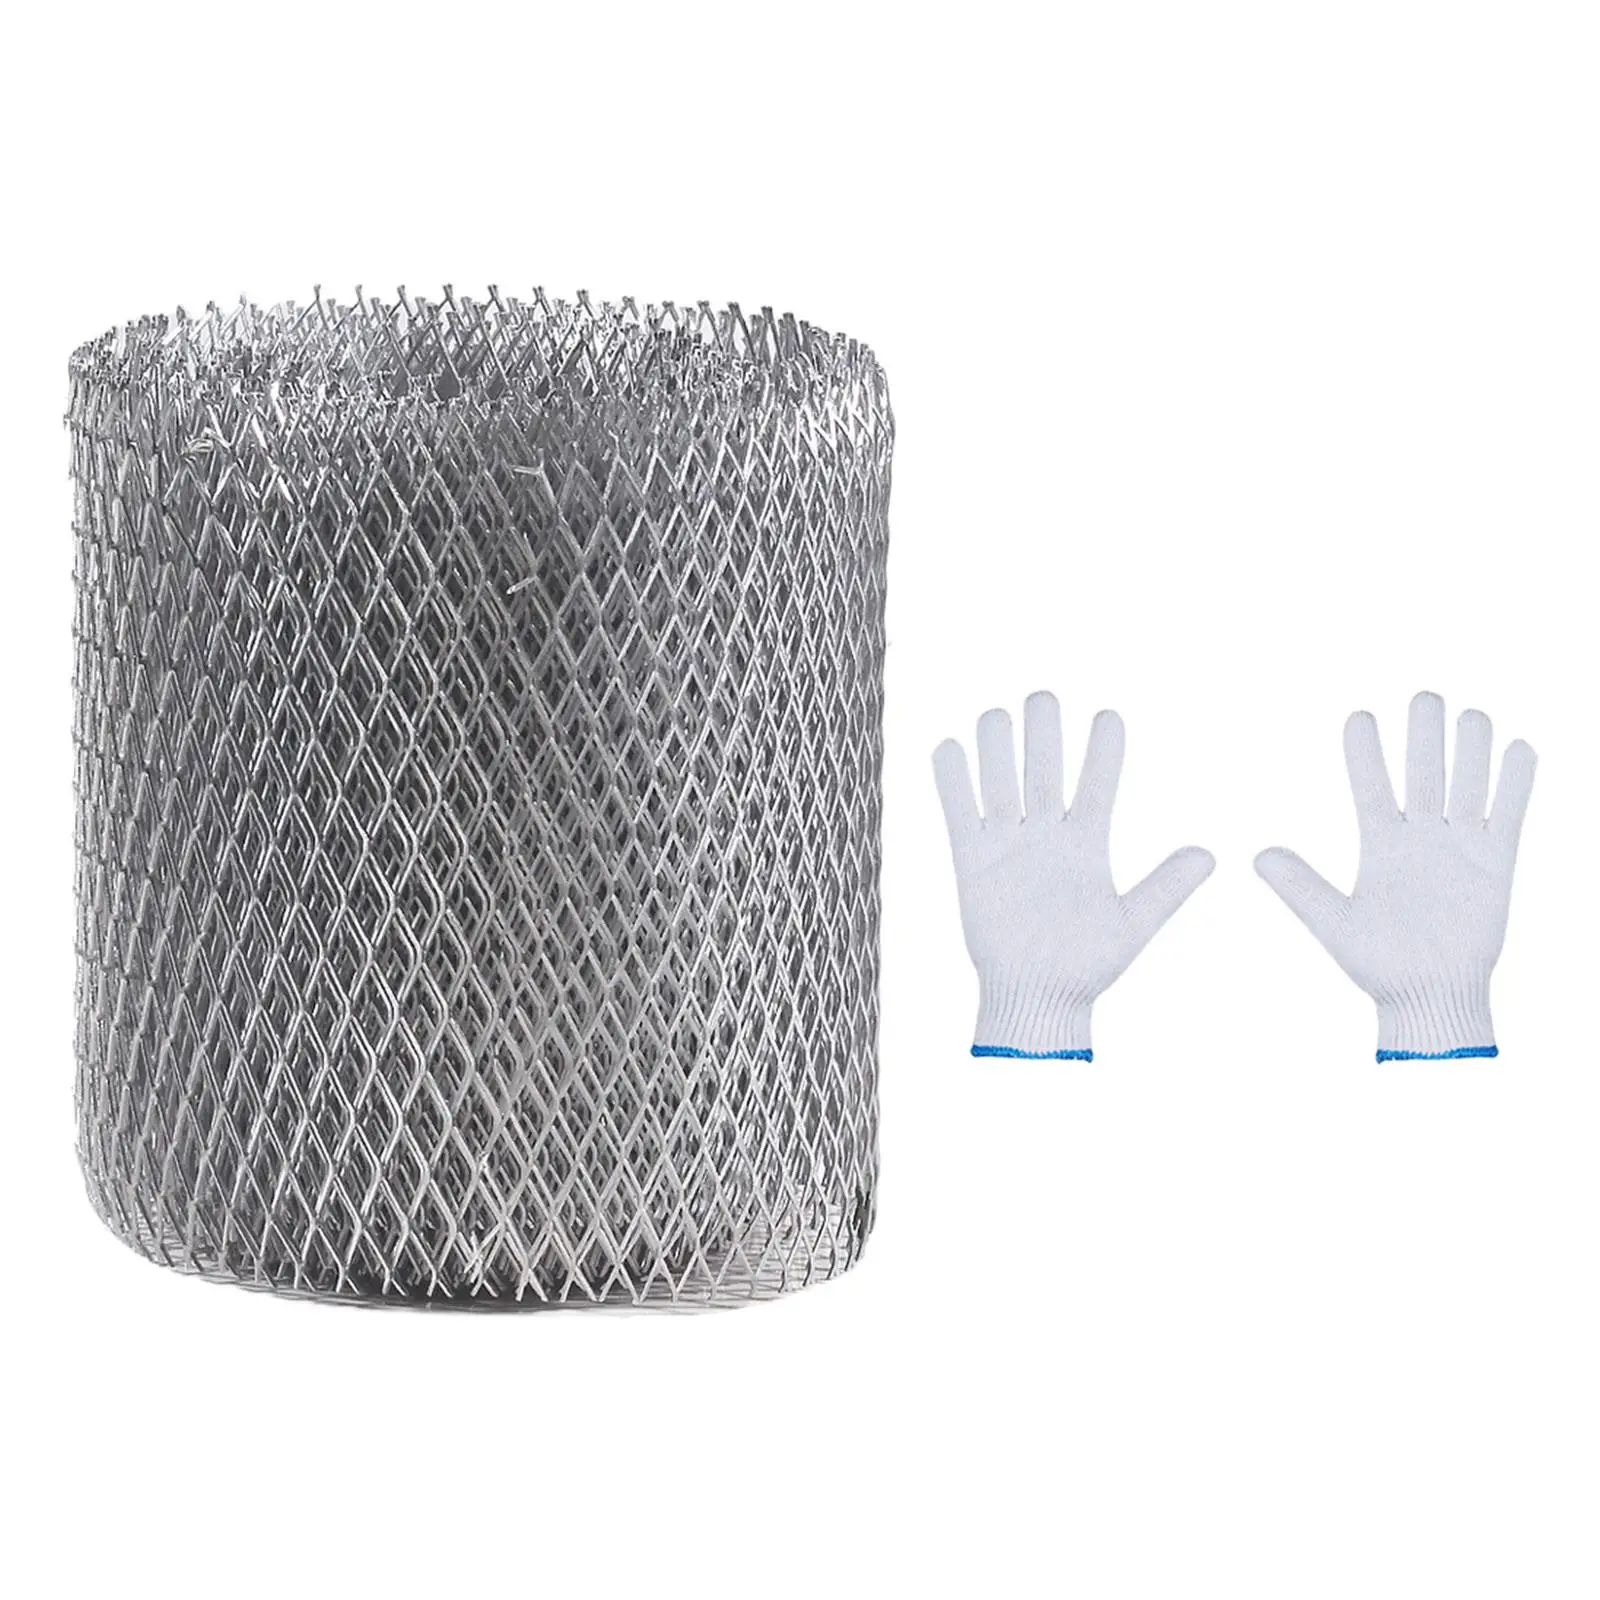 Gutter Guard Mesh Garbage Prevention Leaf Prevention Stable Easy Installation Multipurpose for Downspout Yard Accessories